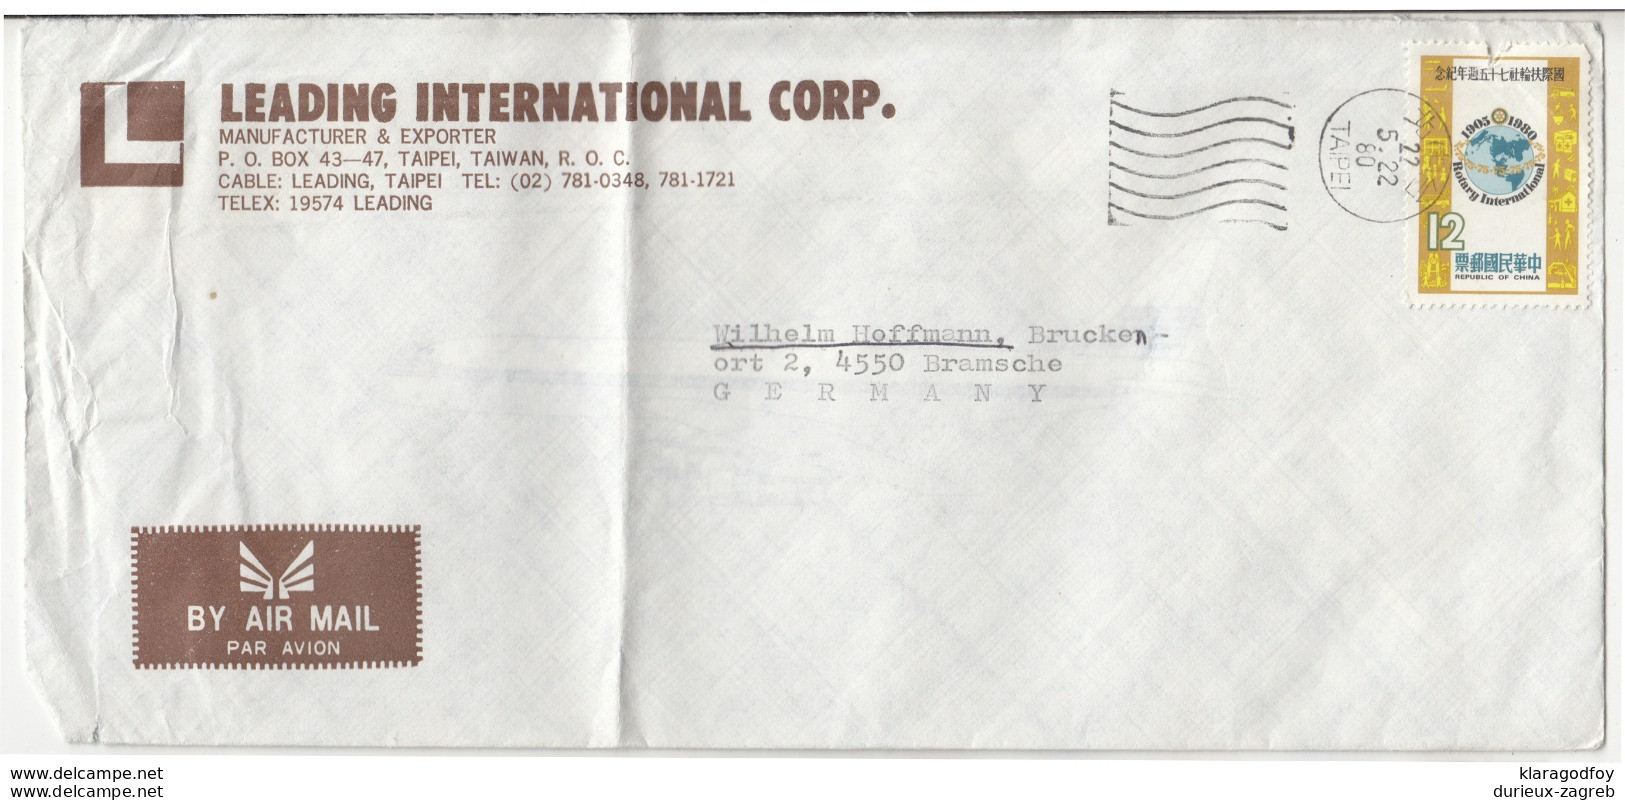 Leading International Taipei Company Air Mail Letter Cover Travelled 1980? To Germany B190922 - Lettres & Documents